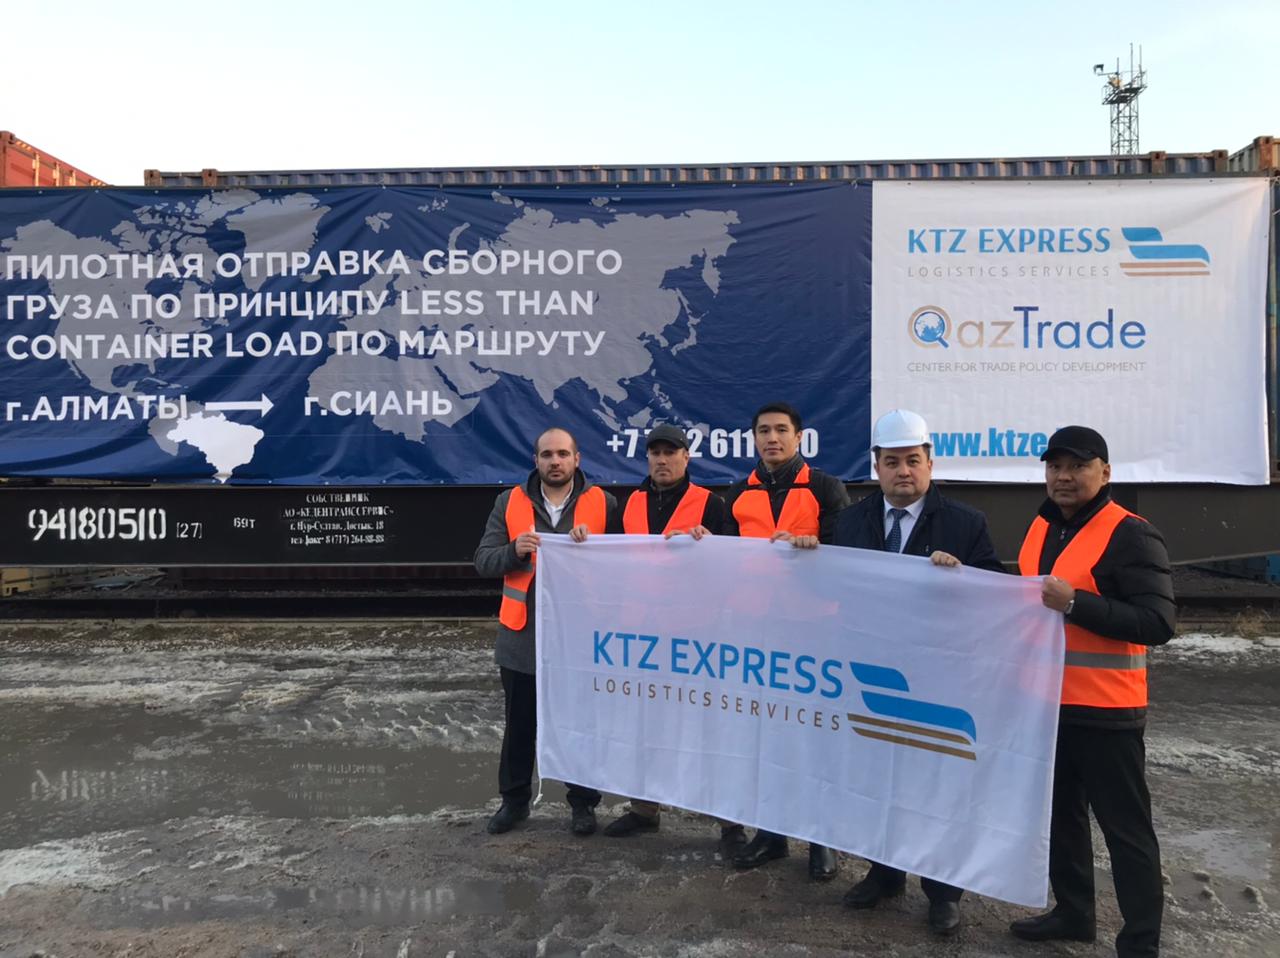 Cargo transportation to China using a new service offered by railway company